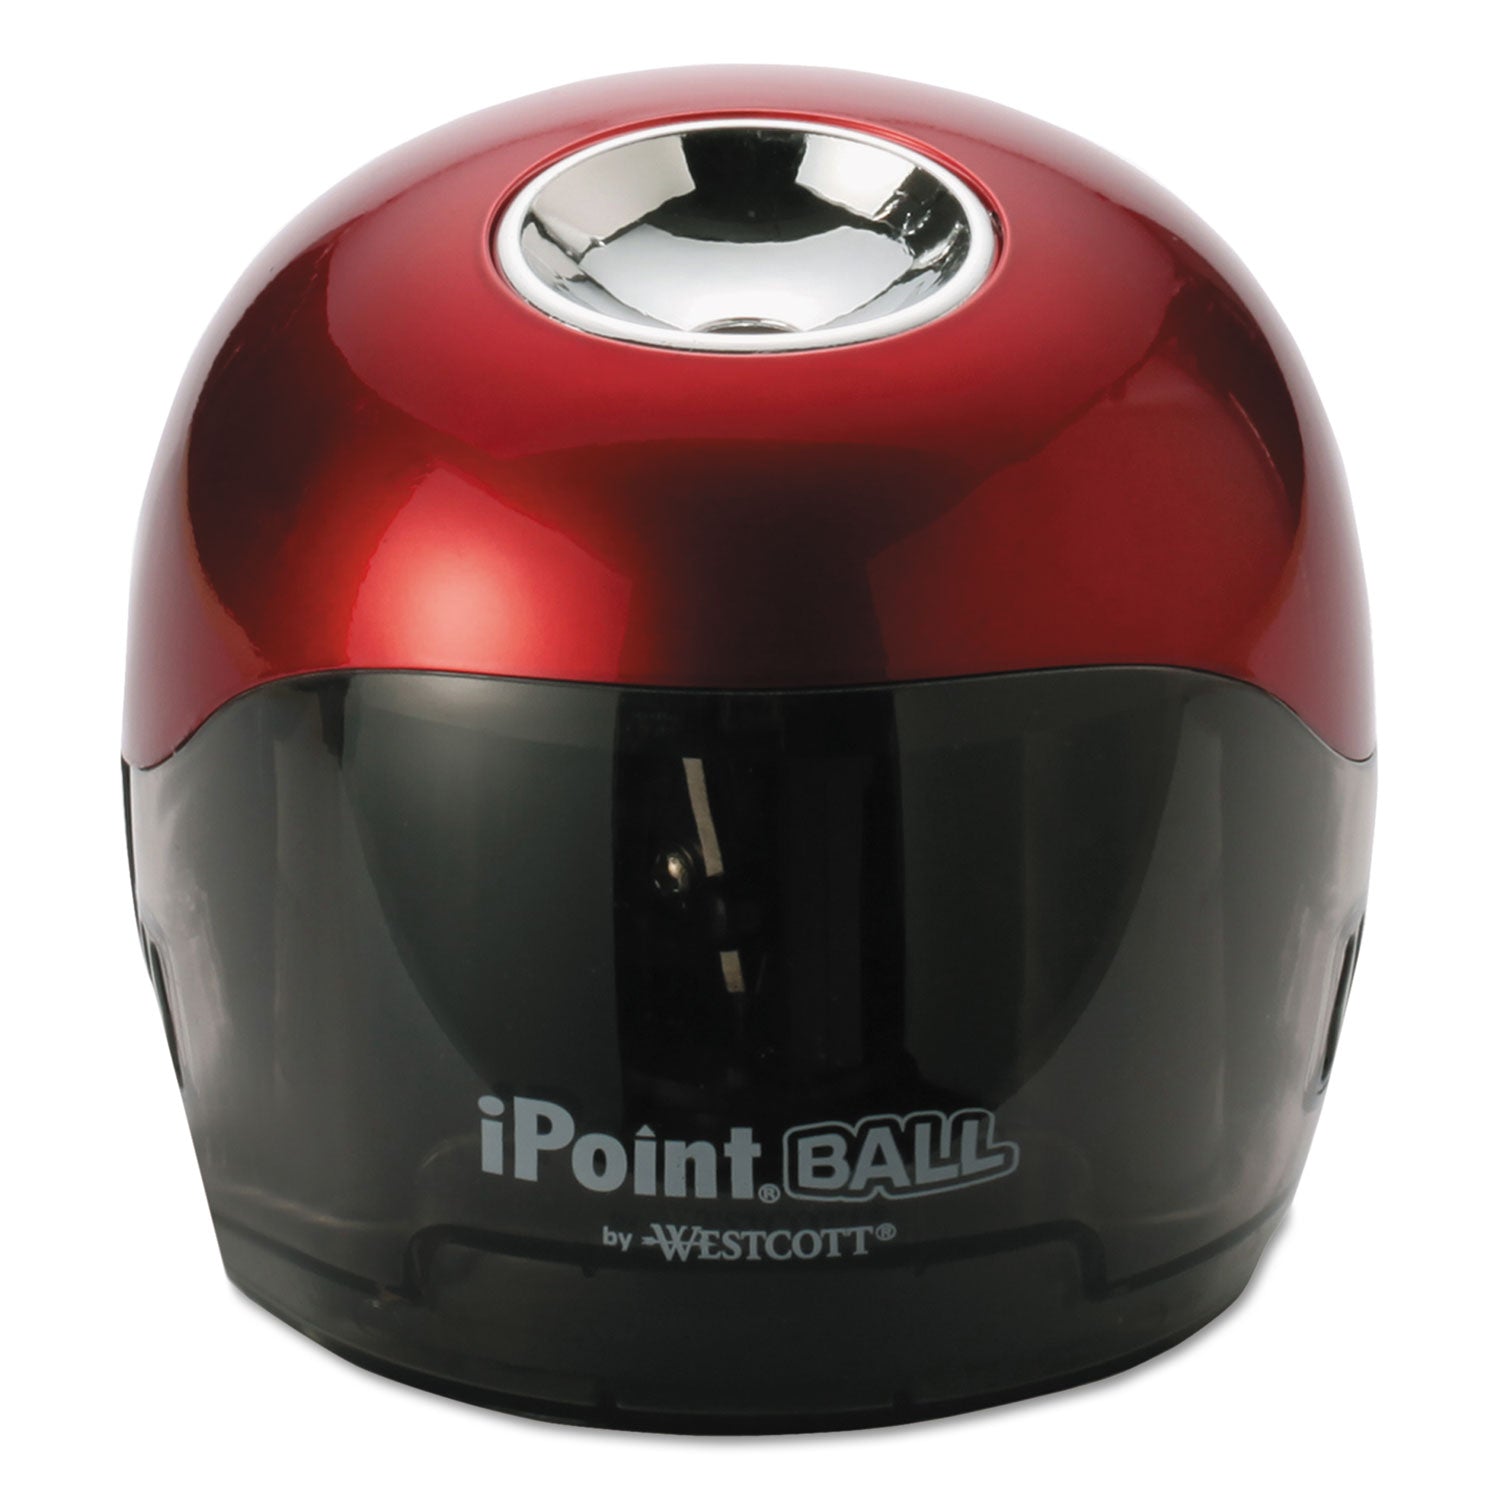 iPoint Ball Battery Sharpener, Battery-Powered, 3 x 3.25, Red/Black - 